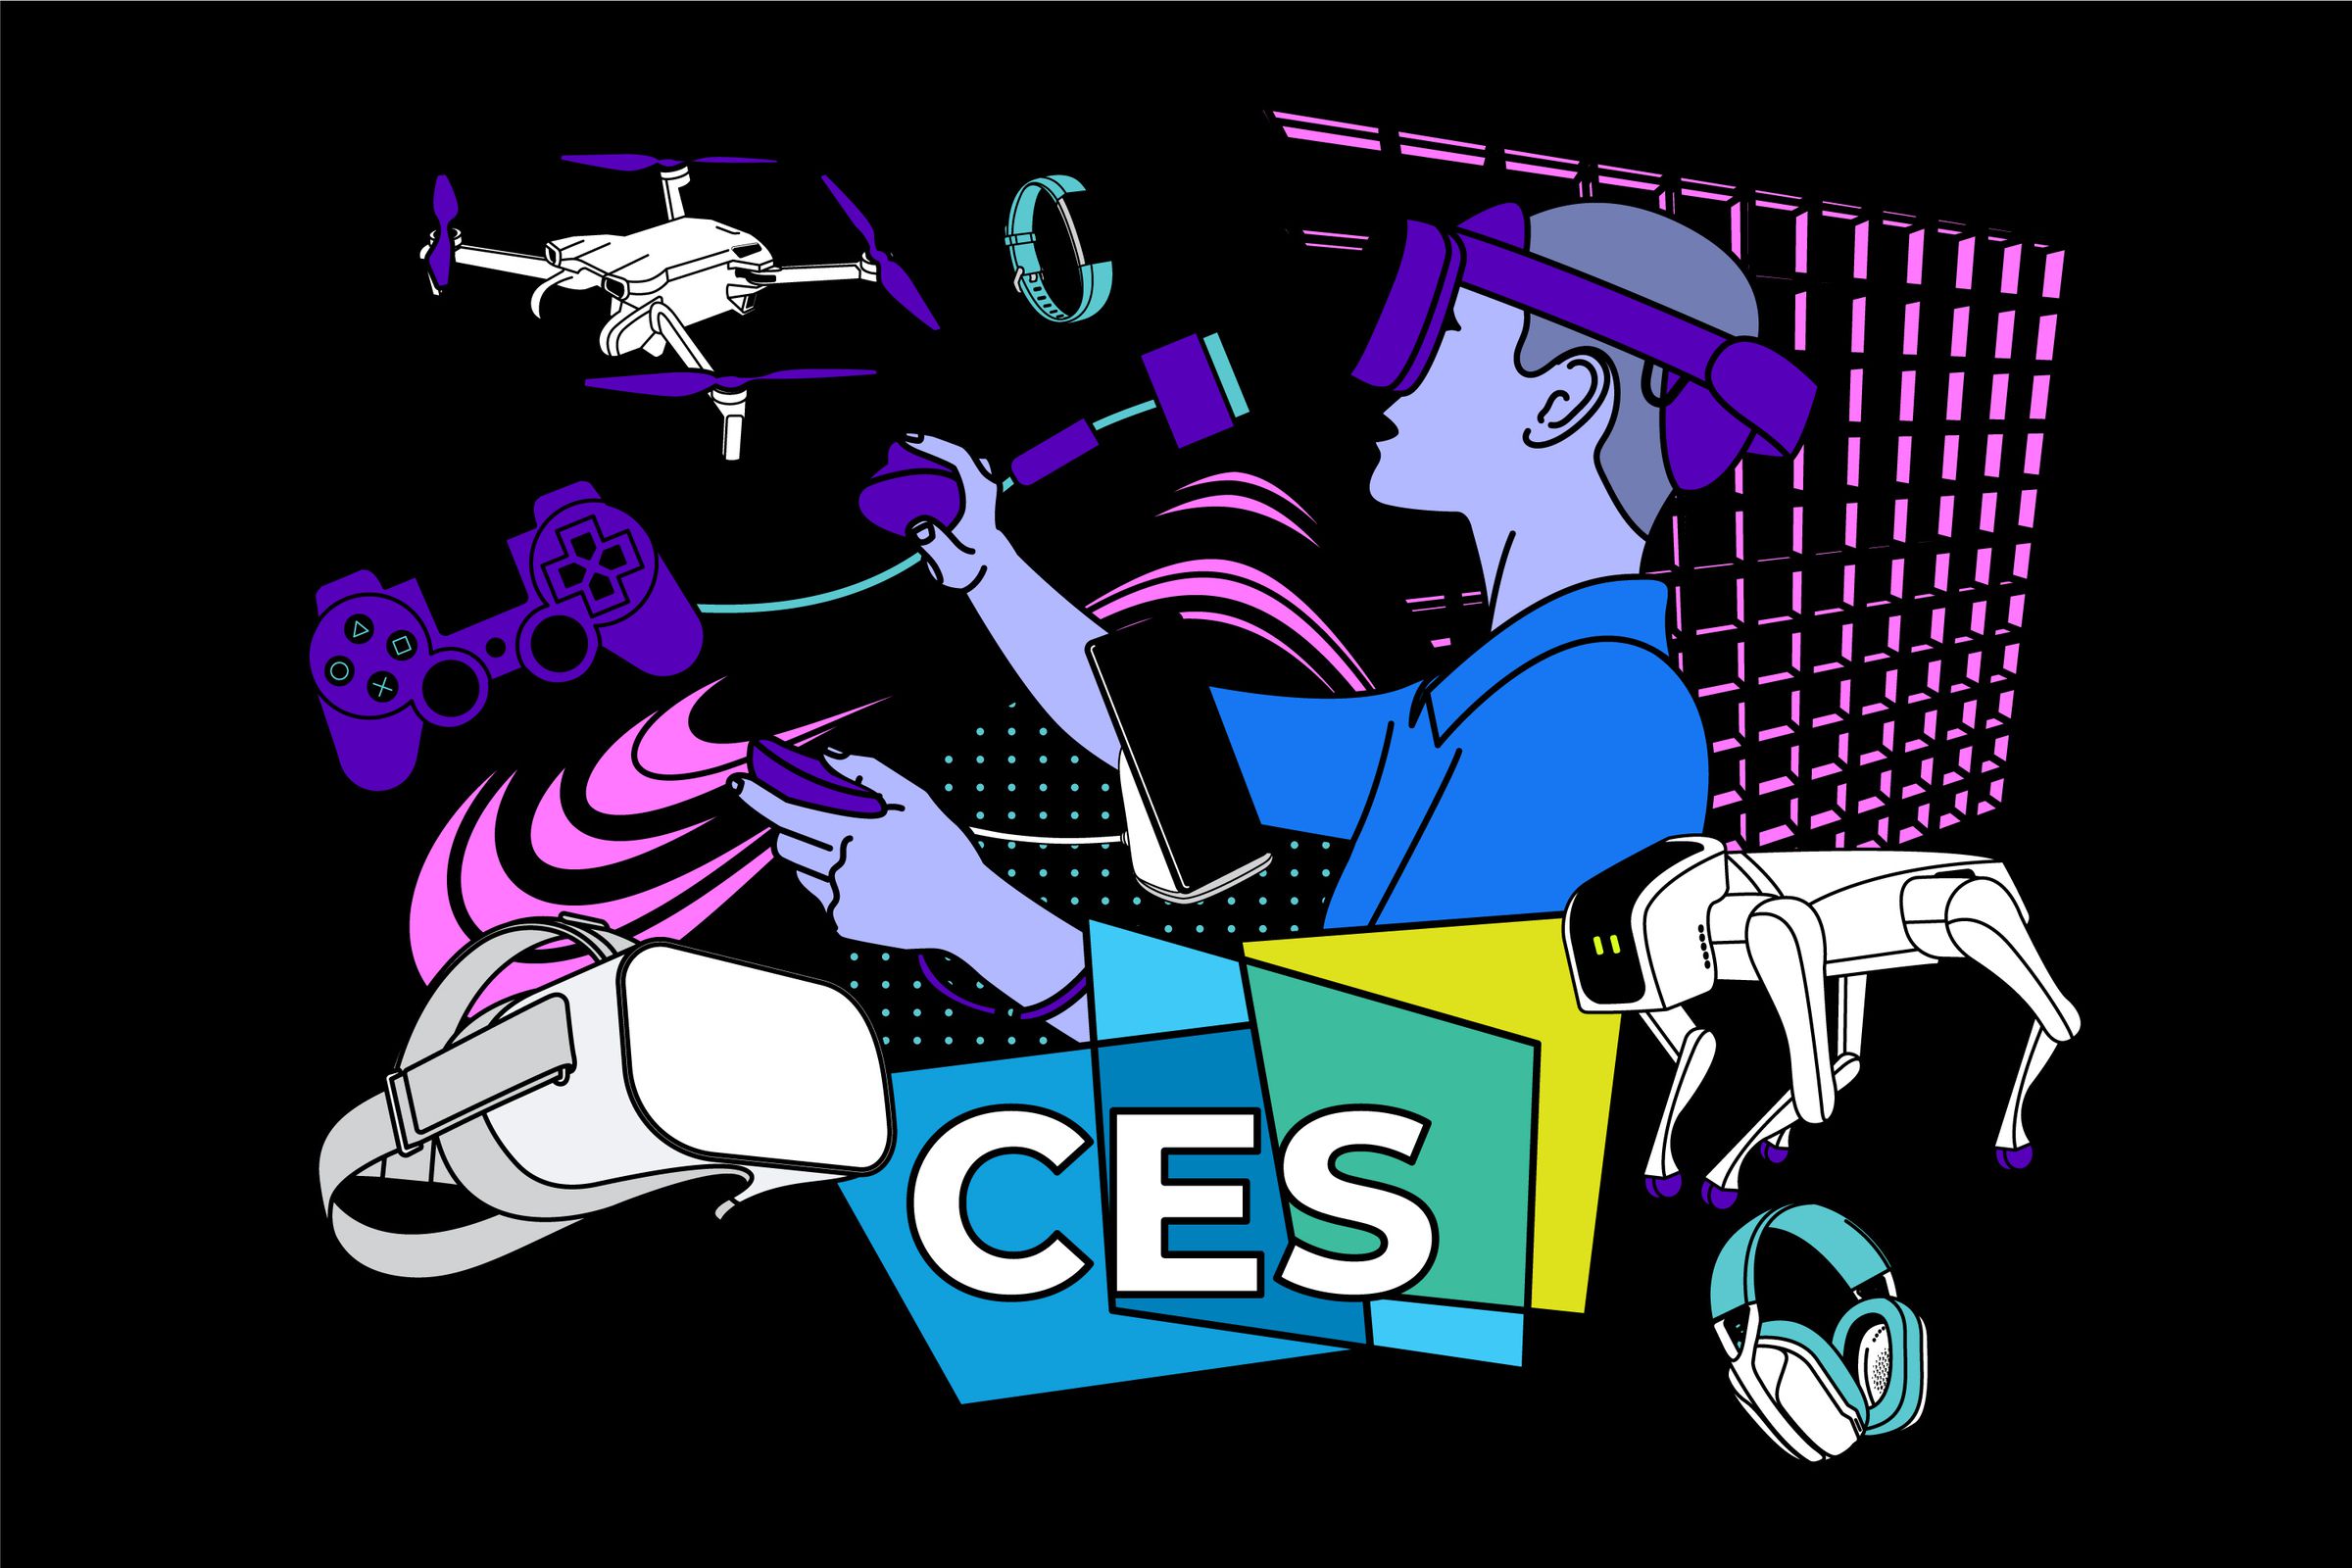 An illustrated collage of gadgets around a logo for CES. There’s a drone, controller, VR headset, and more.